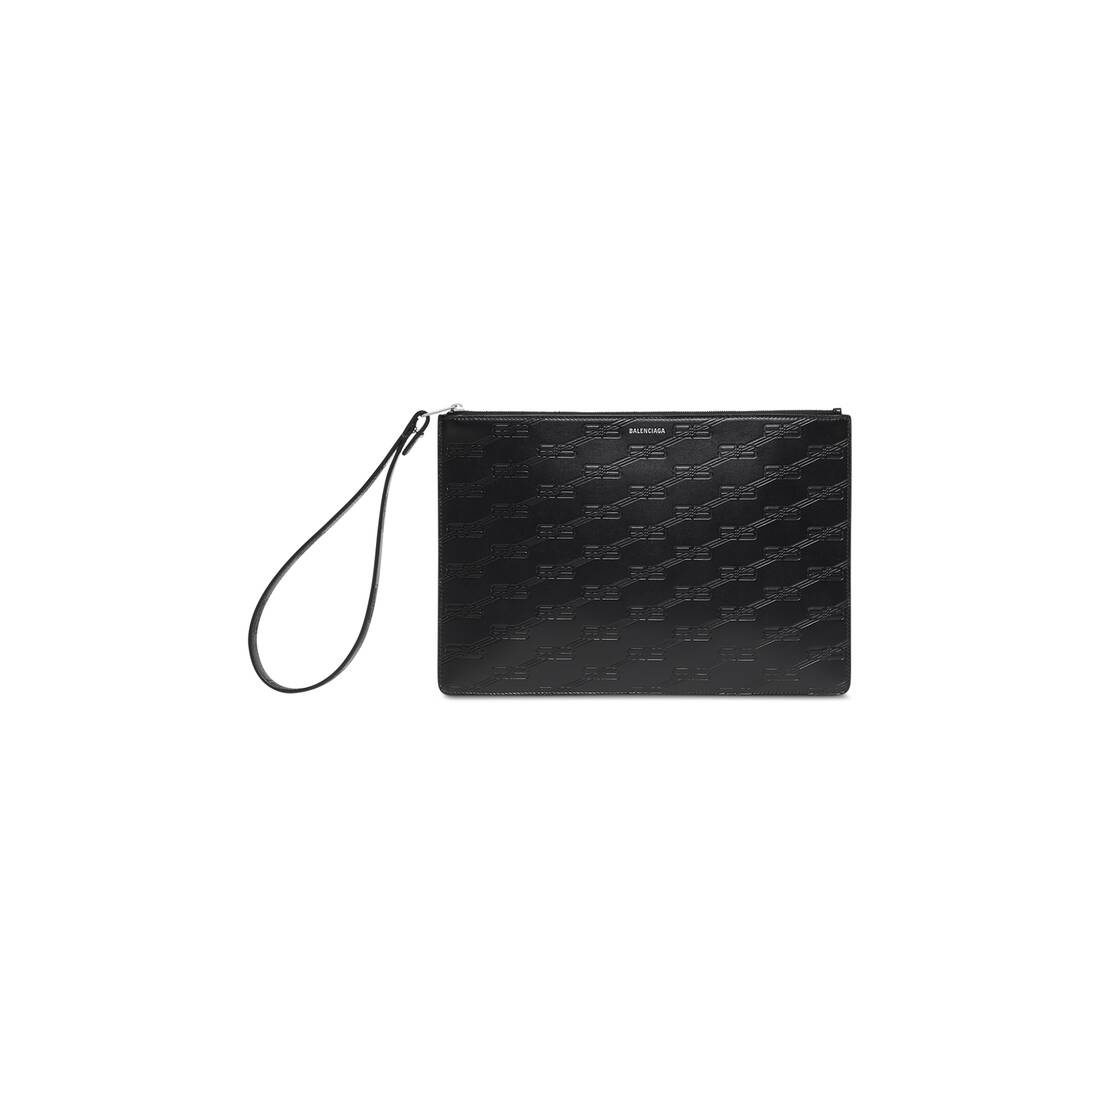 embossed monogram medium pouch with handle in box - 1